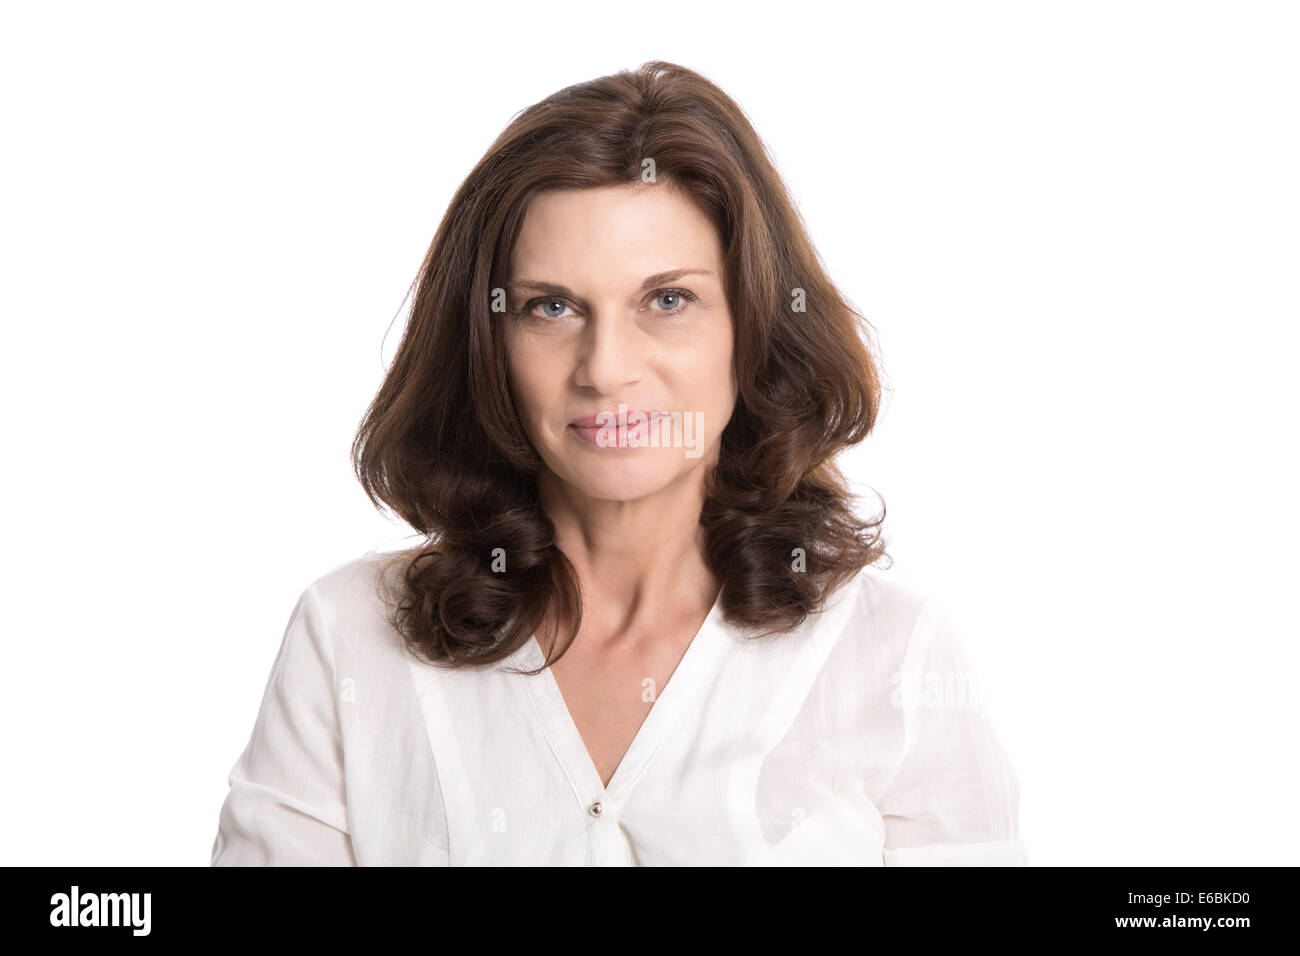 Isolated serious and doubtful mature woman in middle age. Stock Photo